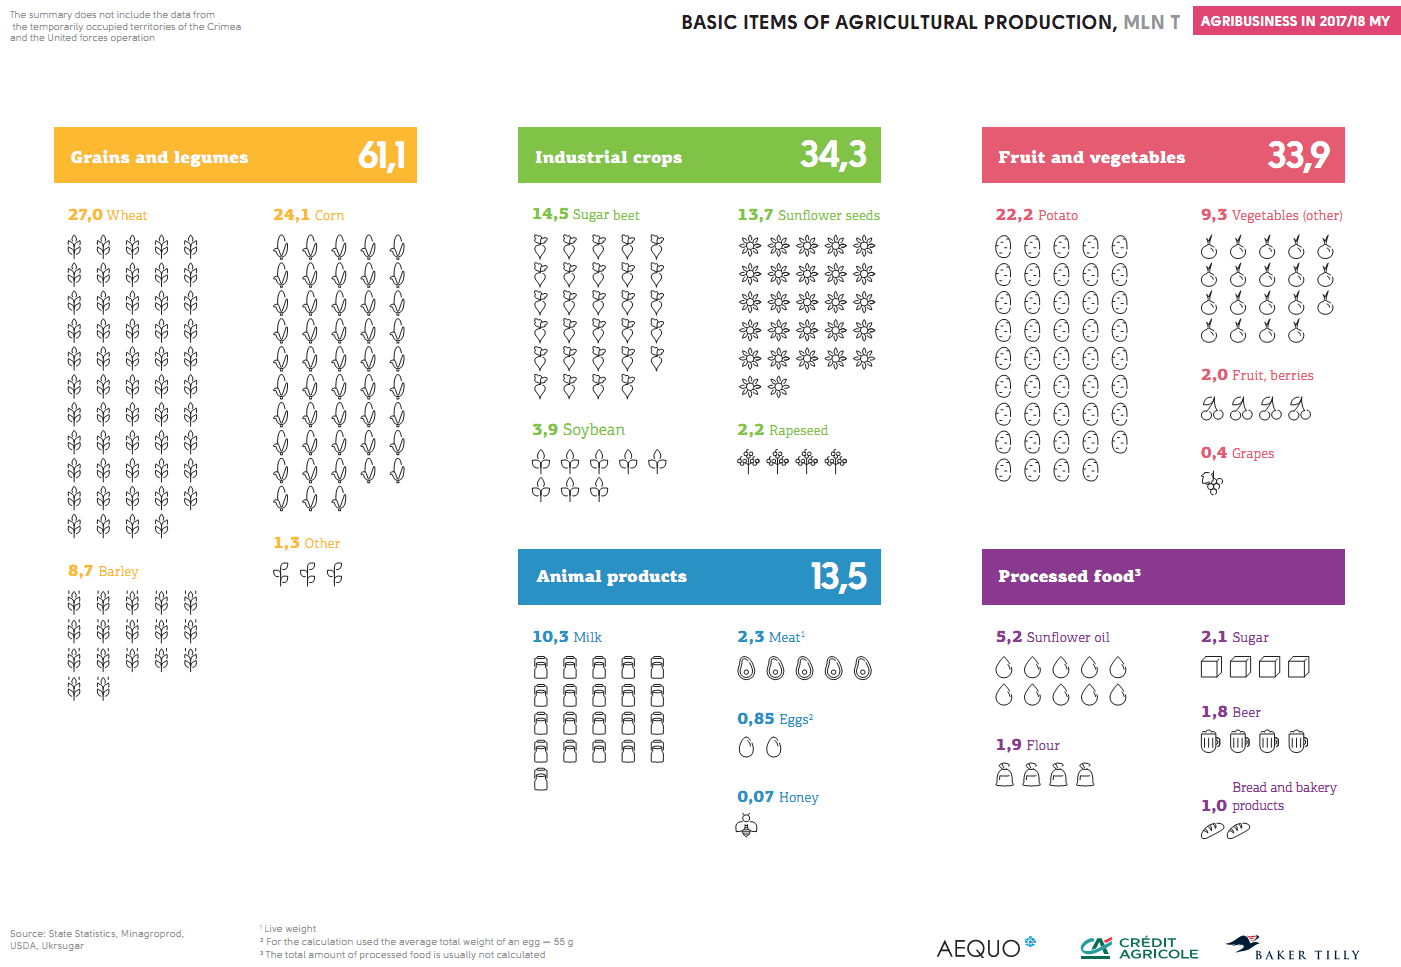 Basic items of agricultural production in Ukraine (click for full resolution)